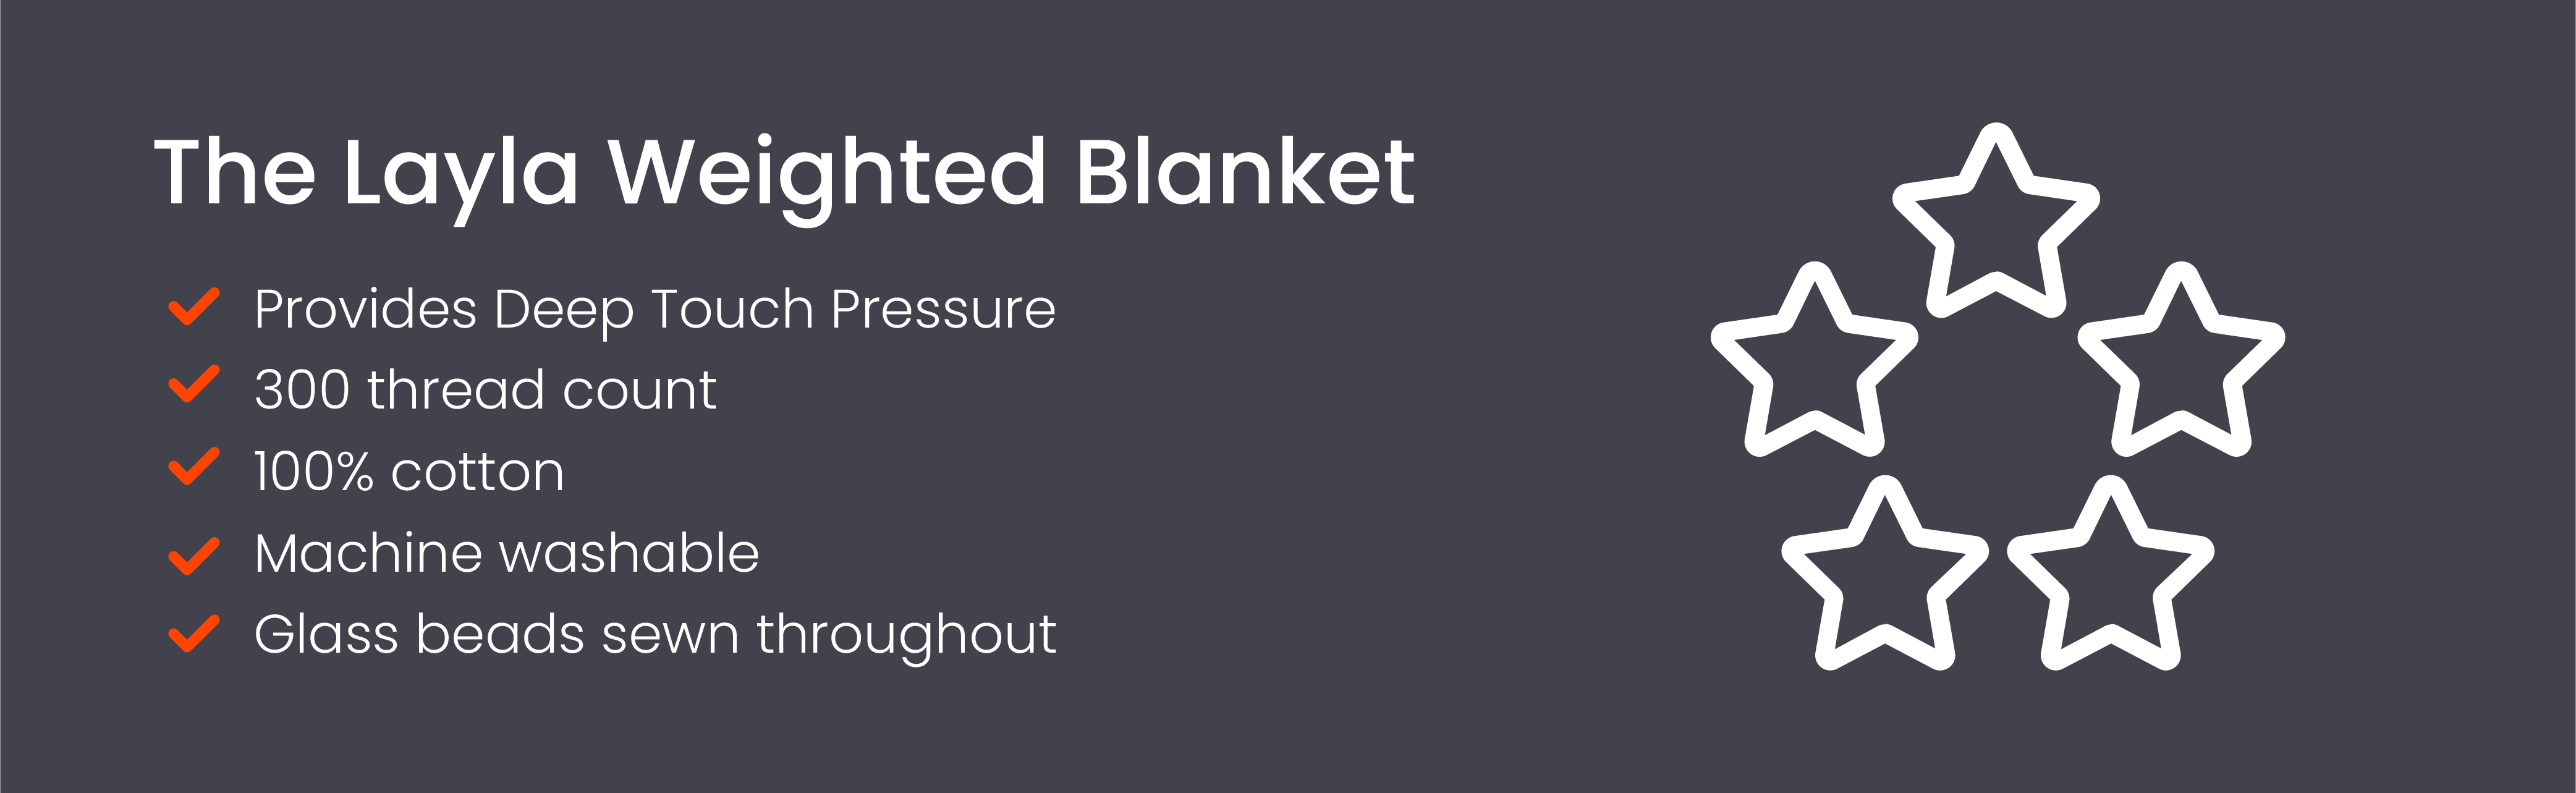 features of a weighted blanket